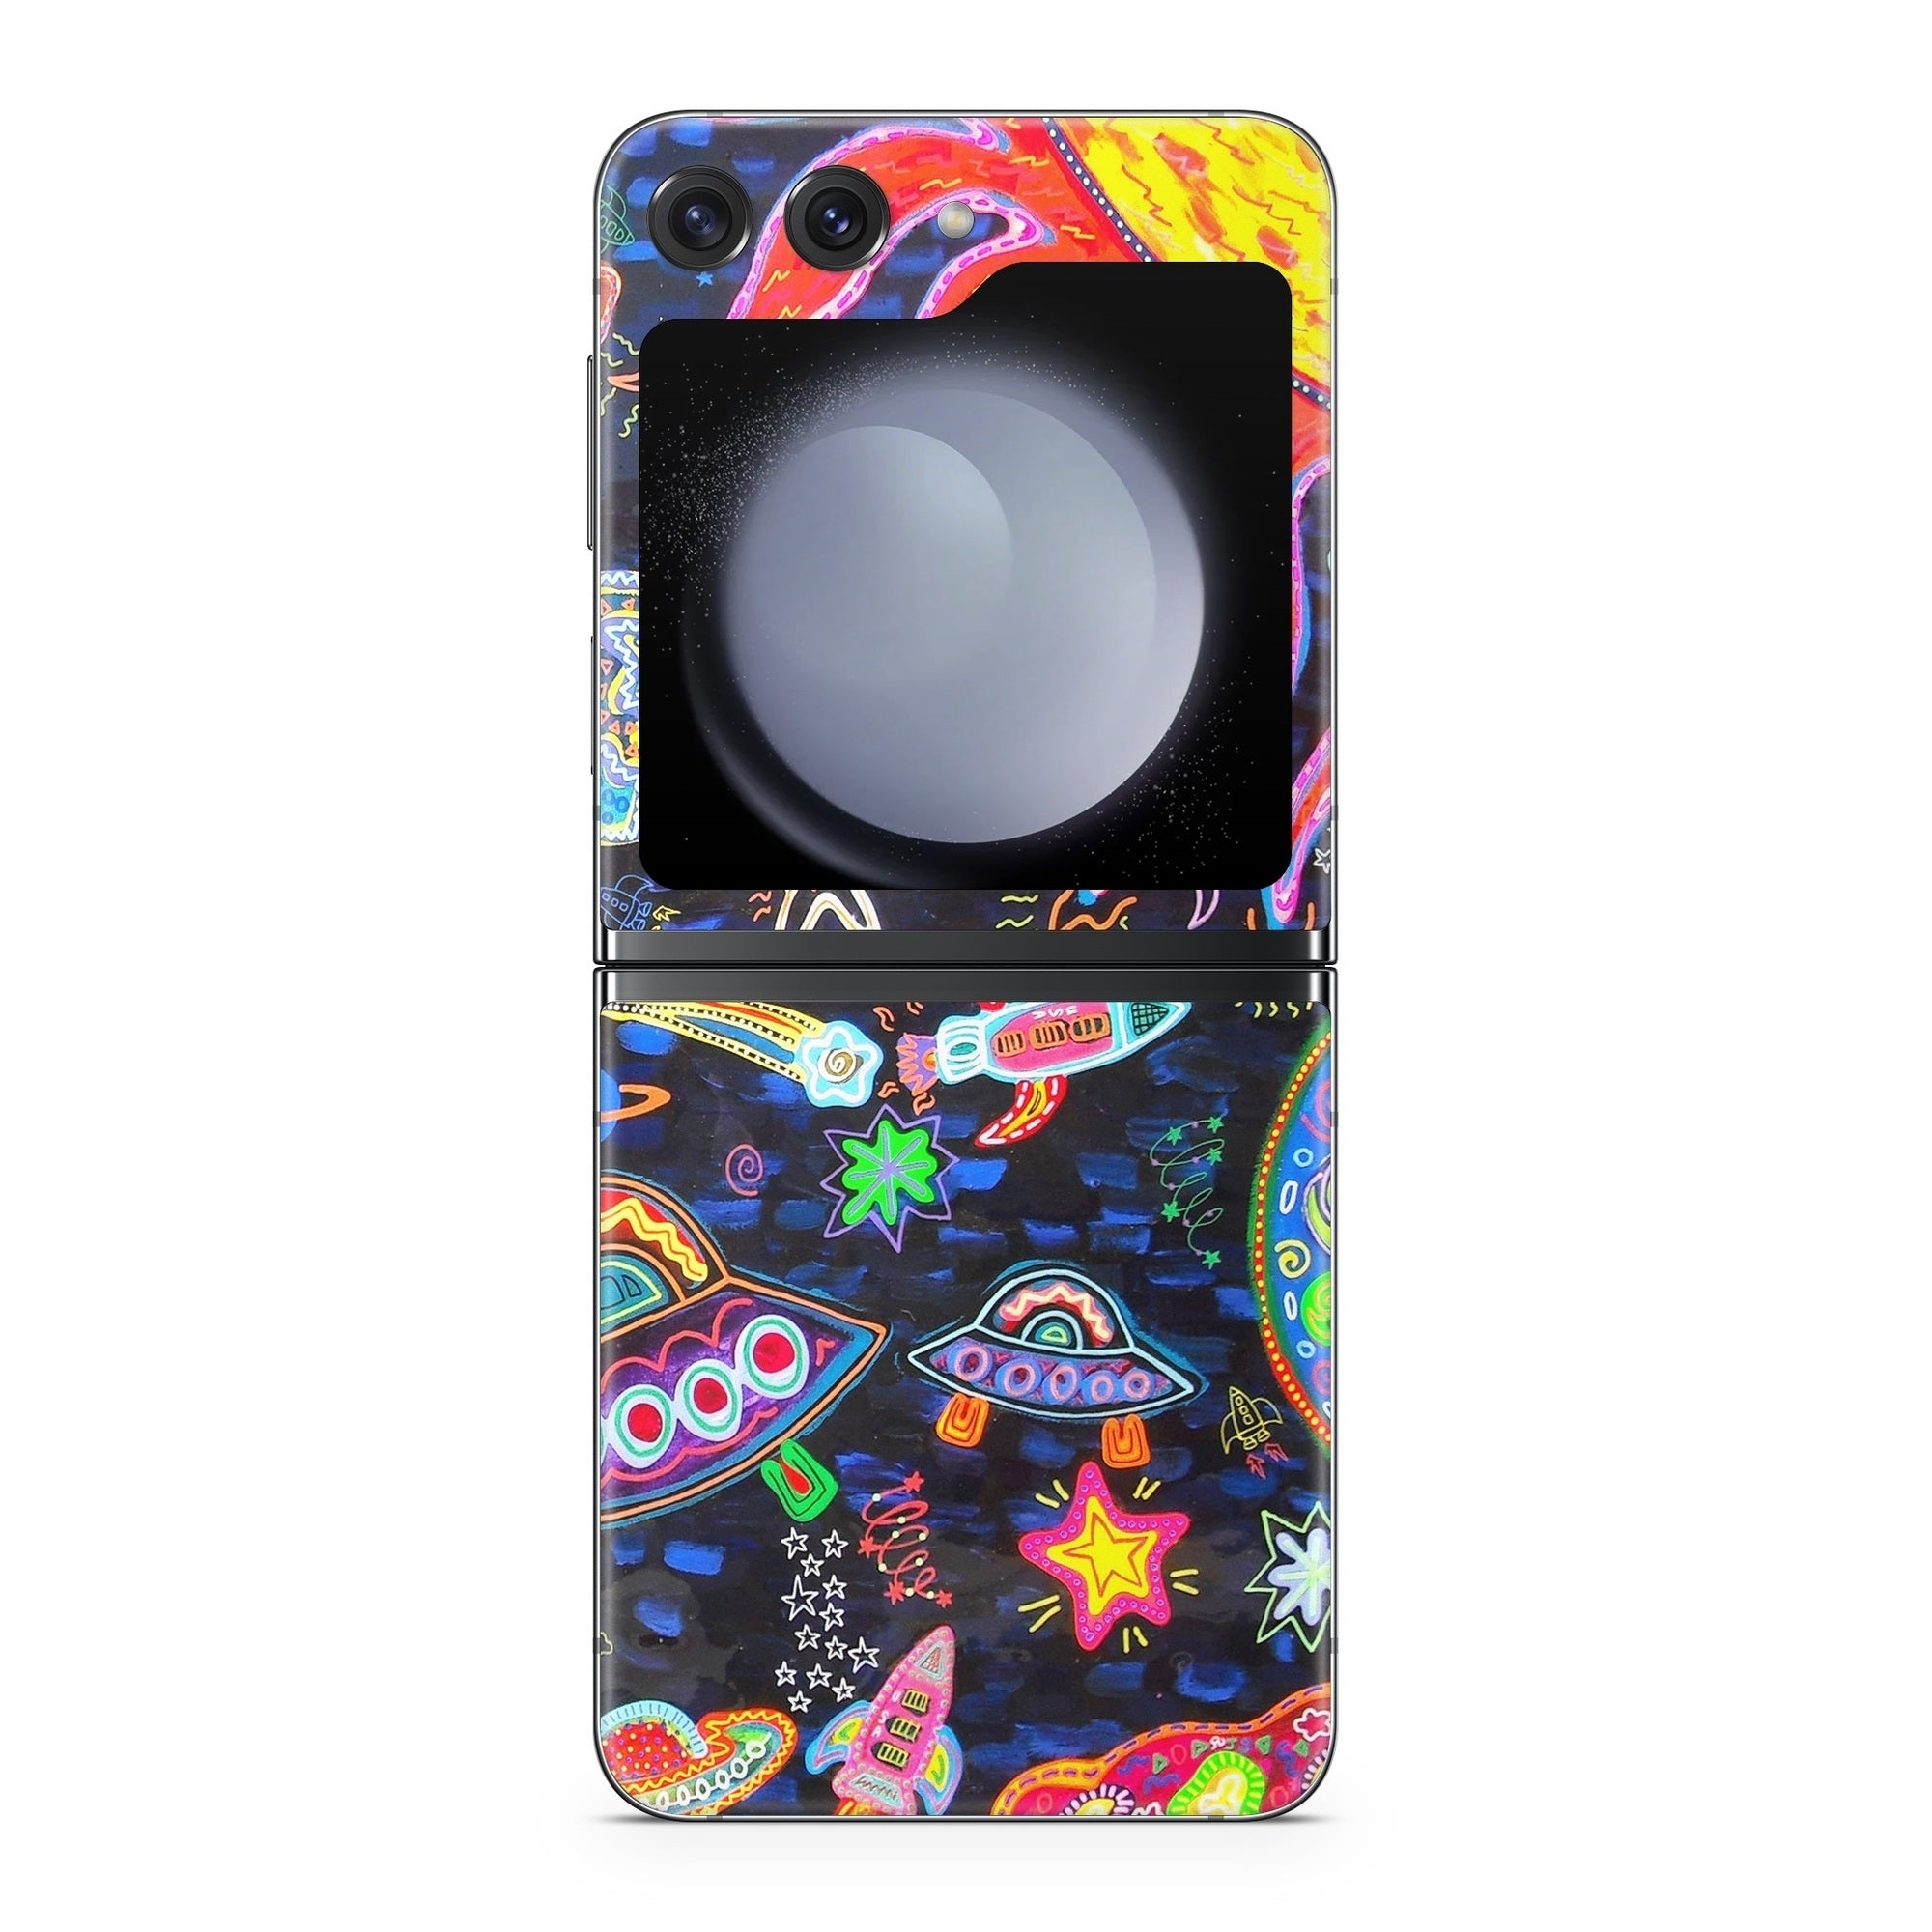 Out to Space - Samsung Galaxy Z Flip5 Skin